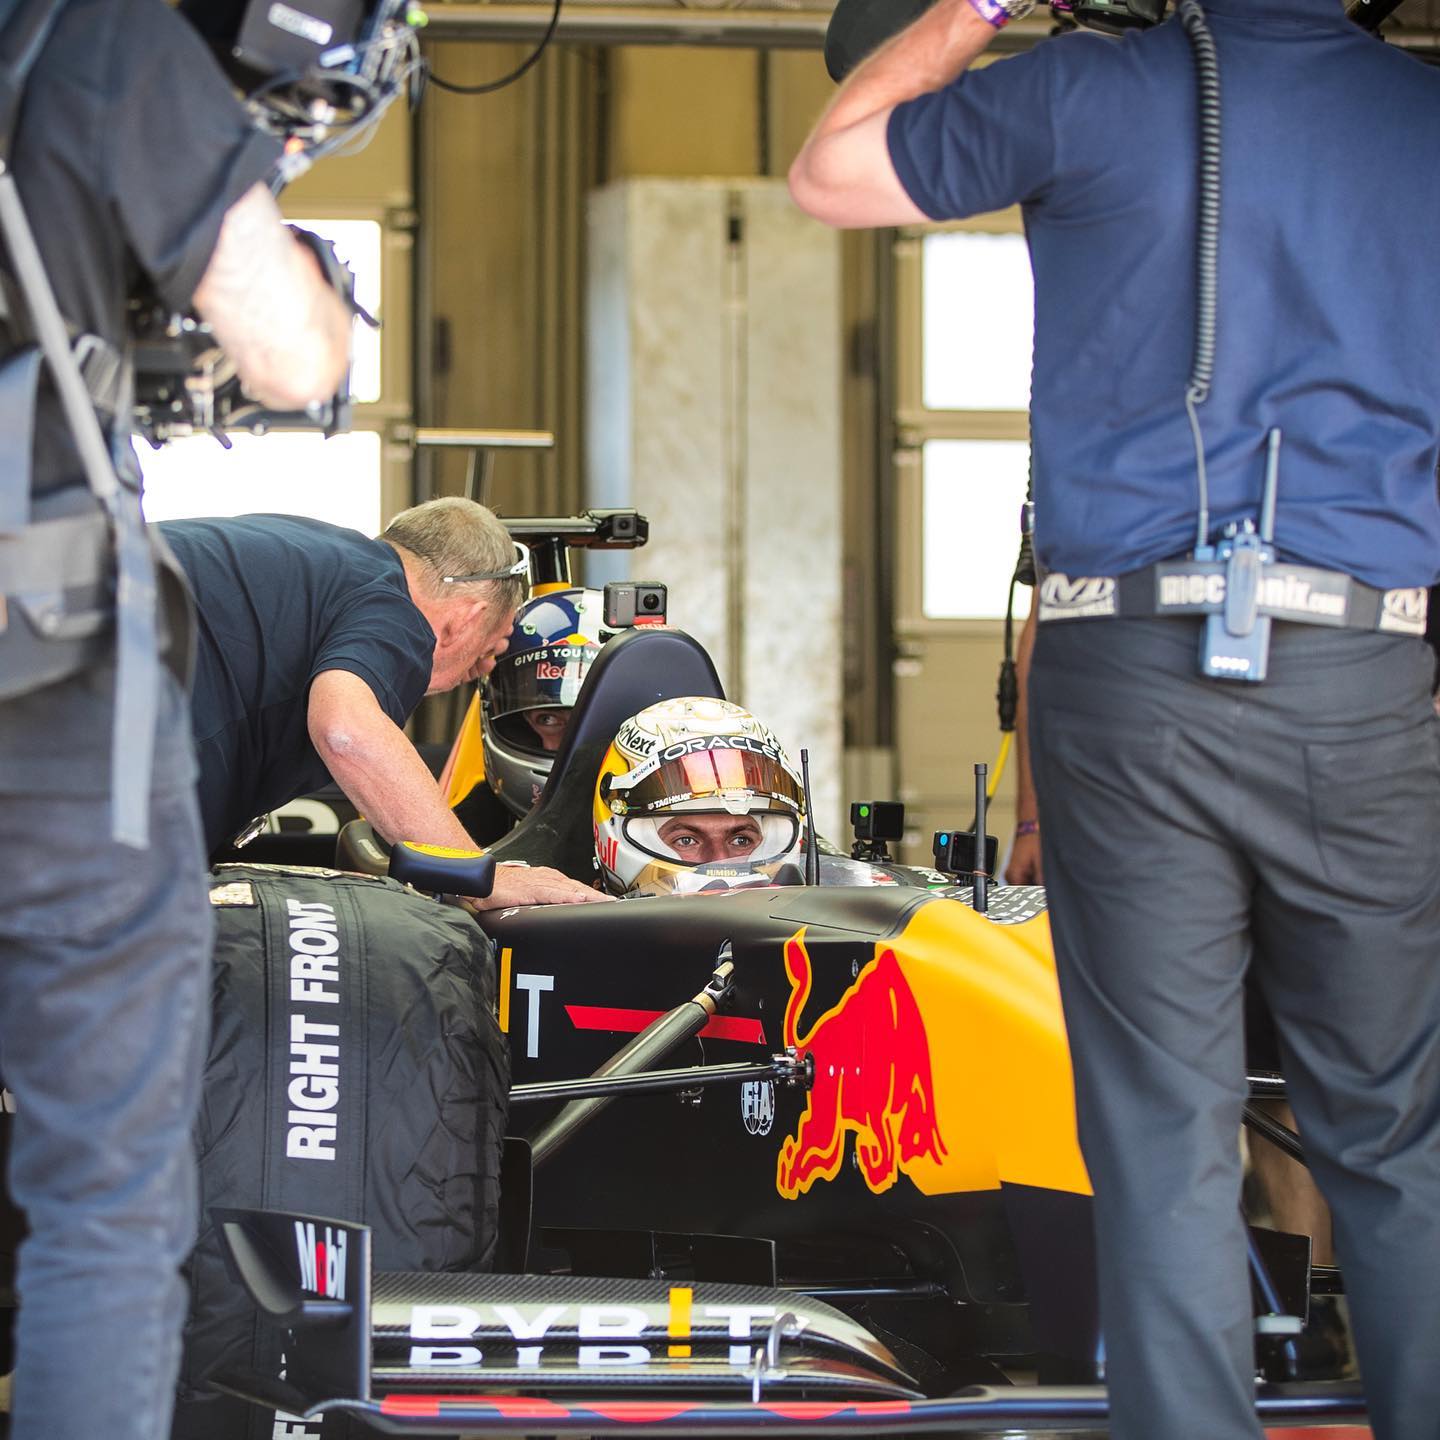 #mondaymotivation Finally working through the 📸 from @redbullring 
🎥 of @maxverstappen1 giving @wibmerfabio a ride in the #F1 #TwoSeater coming soon…

#GoodTimes with the @semicolondigital crew creating unique stories for @redbullaustria and @redbullmotorsports

Probs go out to:
@sherpacinema
@paul.f.kuhn
@manuelzoller_
@maxnuechtern
@stefankleinalstede

and the rest of the crew, where I have no Insta handle… You know who you are.

#formula1 #spielberg #redbullring #redbullmotorsport #F1Experiences #redbullaustria #v10 #v10european #gforce #fabiowibmer #minardi #f1classics #formulaone #redbullracingteam